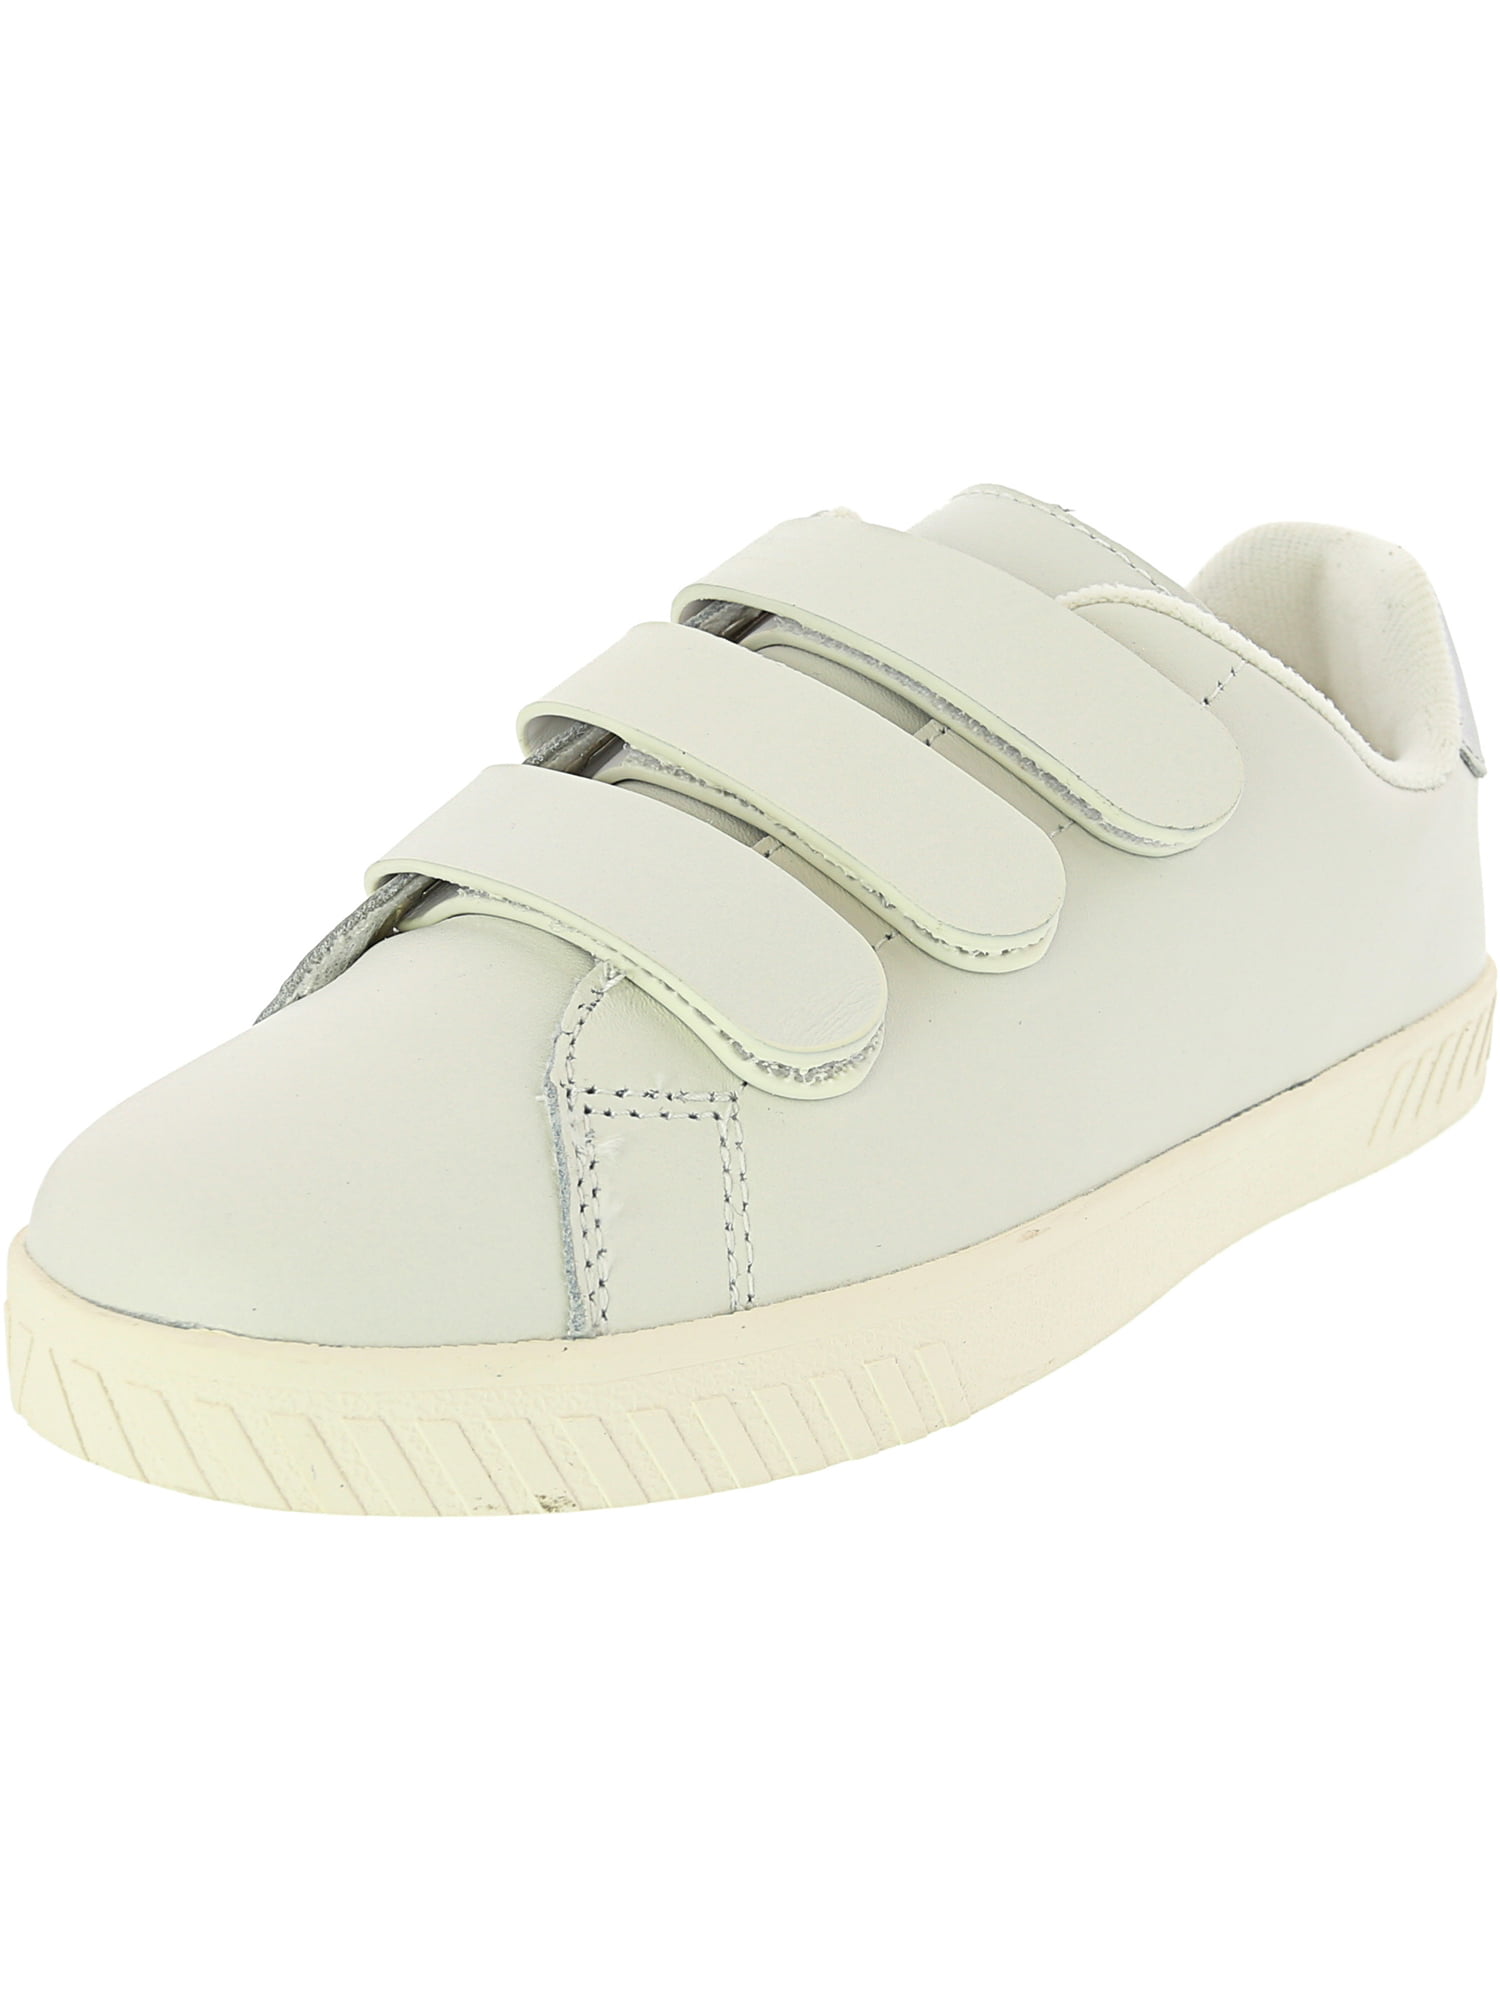 Tretorn Women's CARRY2 Sneaker Vintage White/Silver Leather 7.5 M 